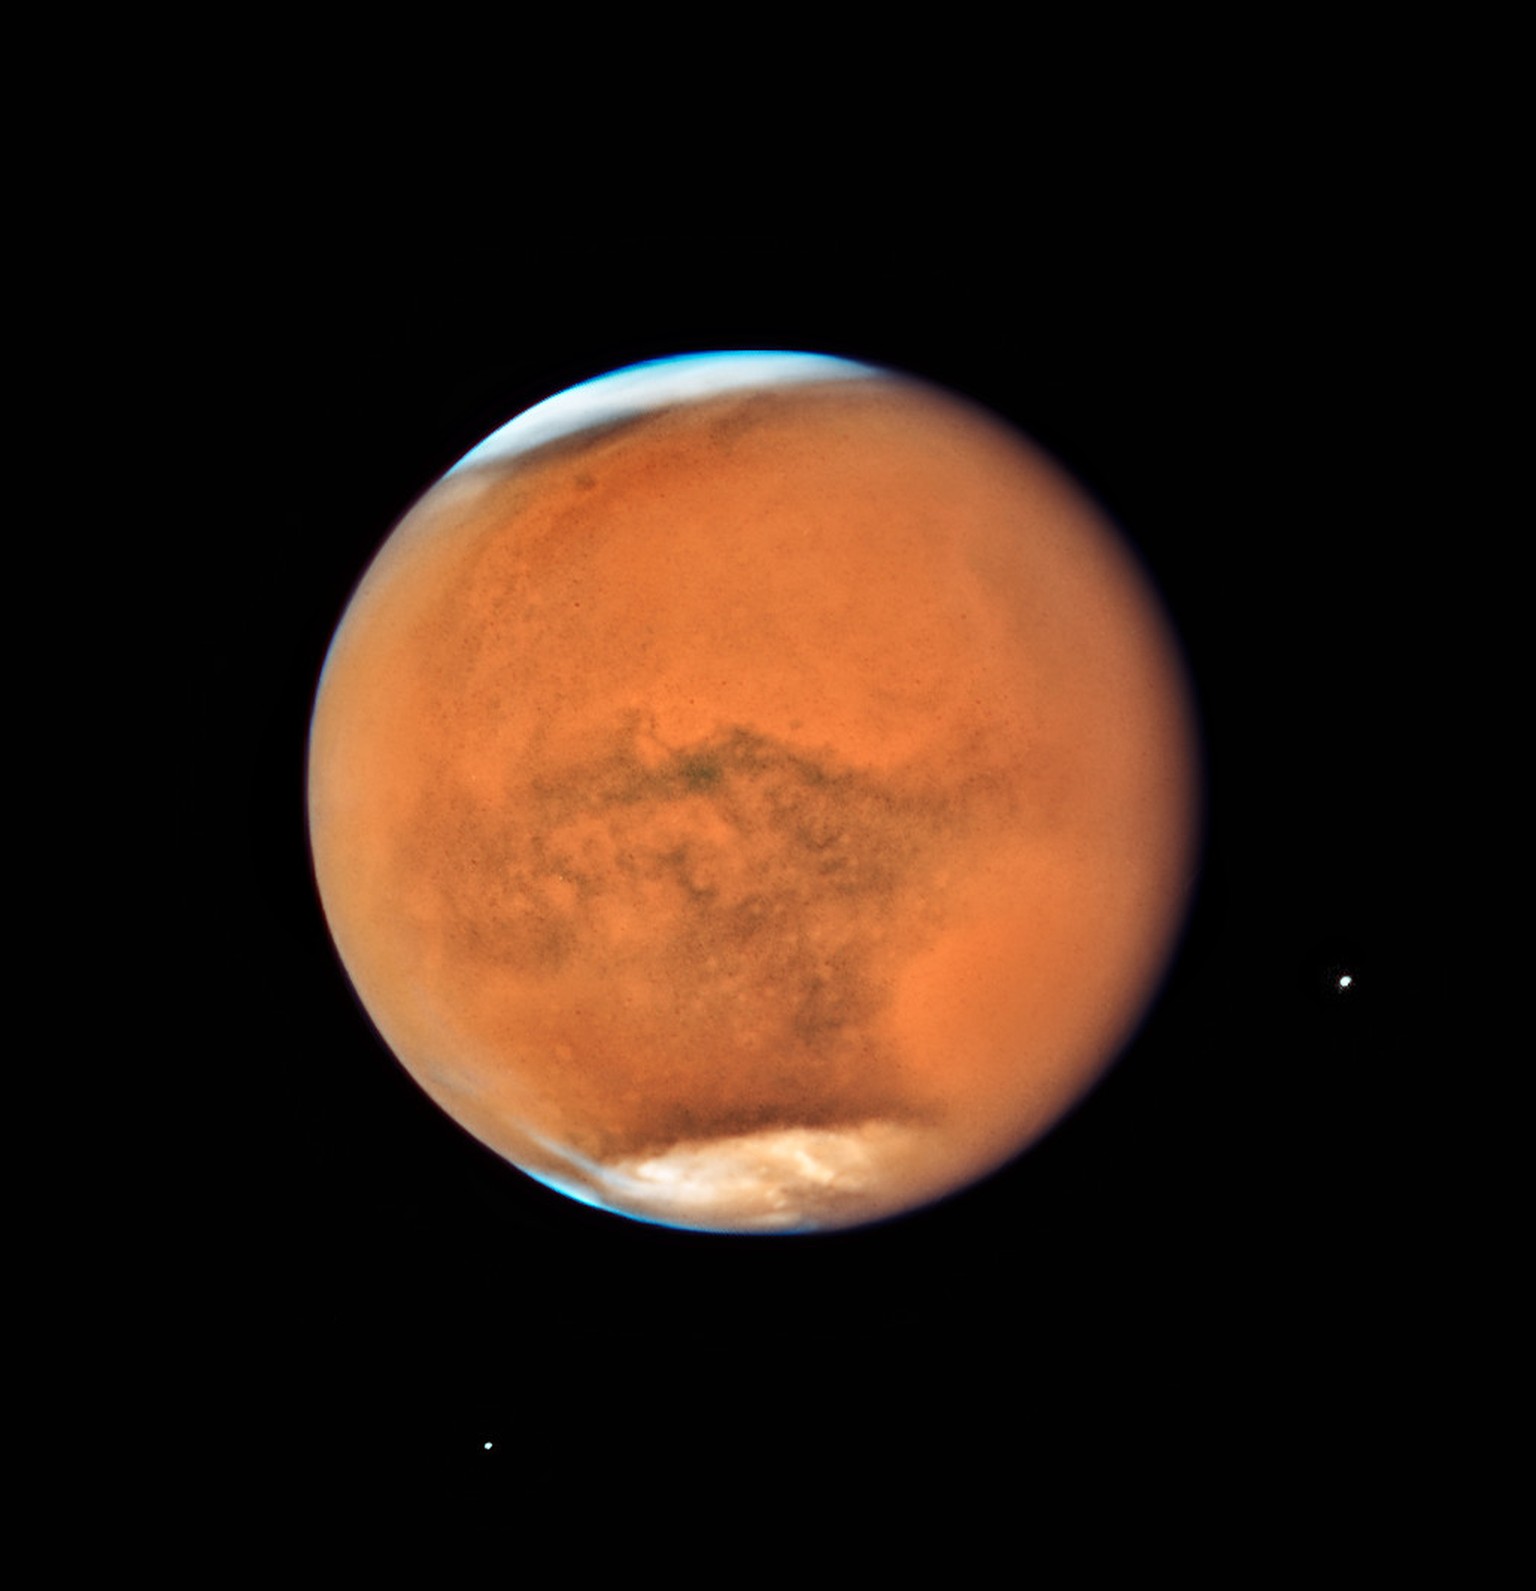 In mid-July the NASA/ESA Hubble Space Telescope observed Mars, only 13 days before the planet made its closest approach to Earth in 2018. While previous images showed detailed surface features of the  ...